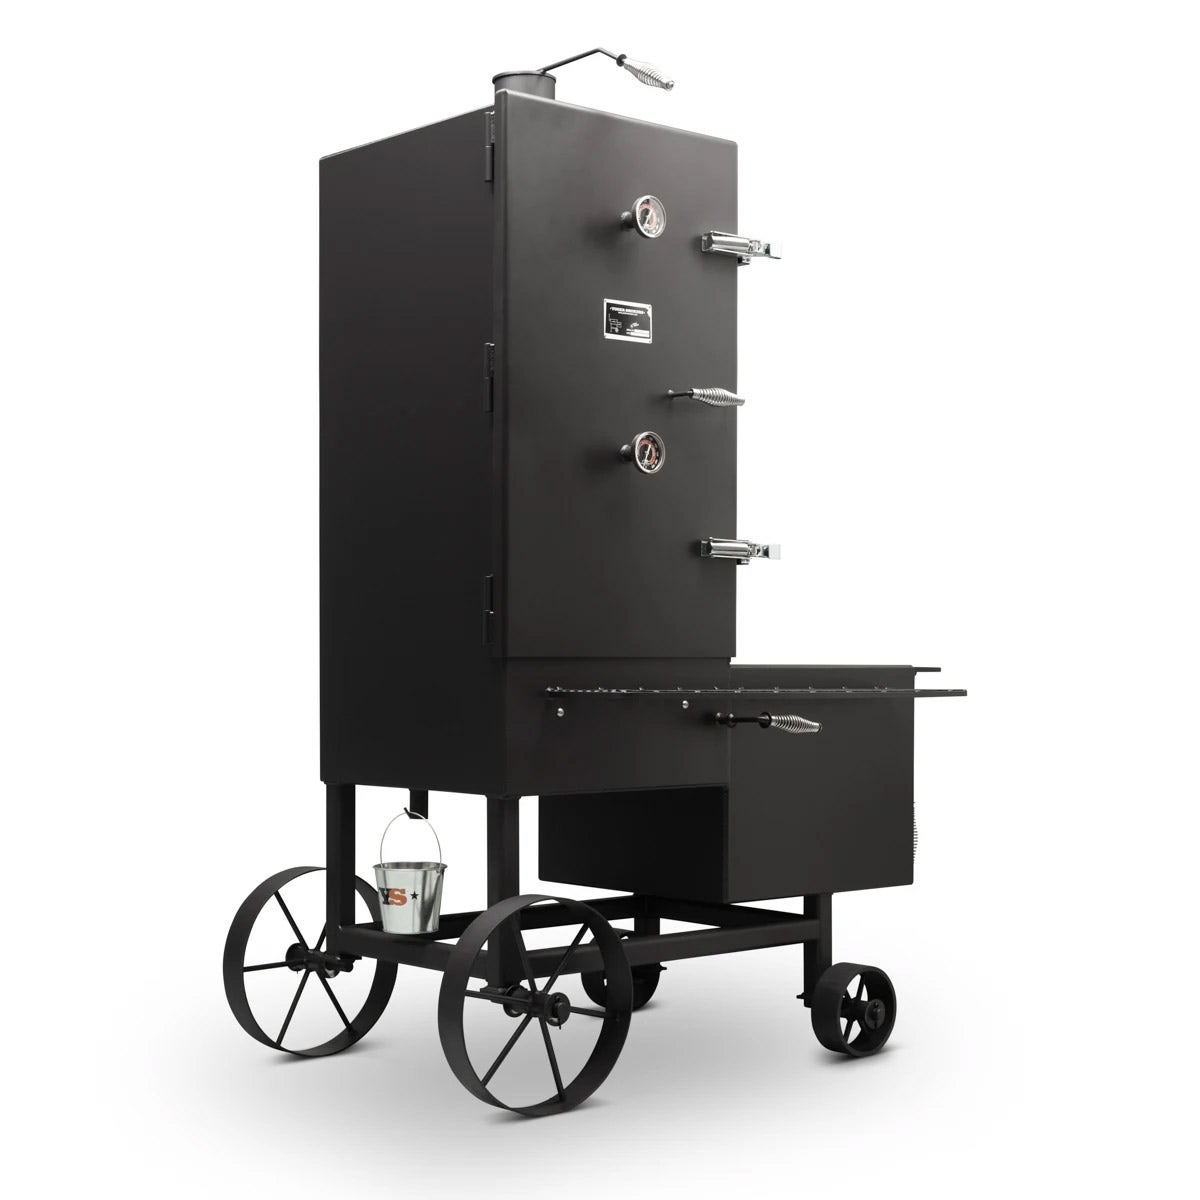 Yoder Smokers 24 inch Stockton Vertical Smoker Outdoor Grills 12021054